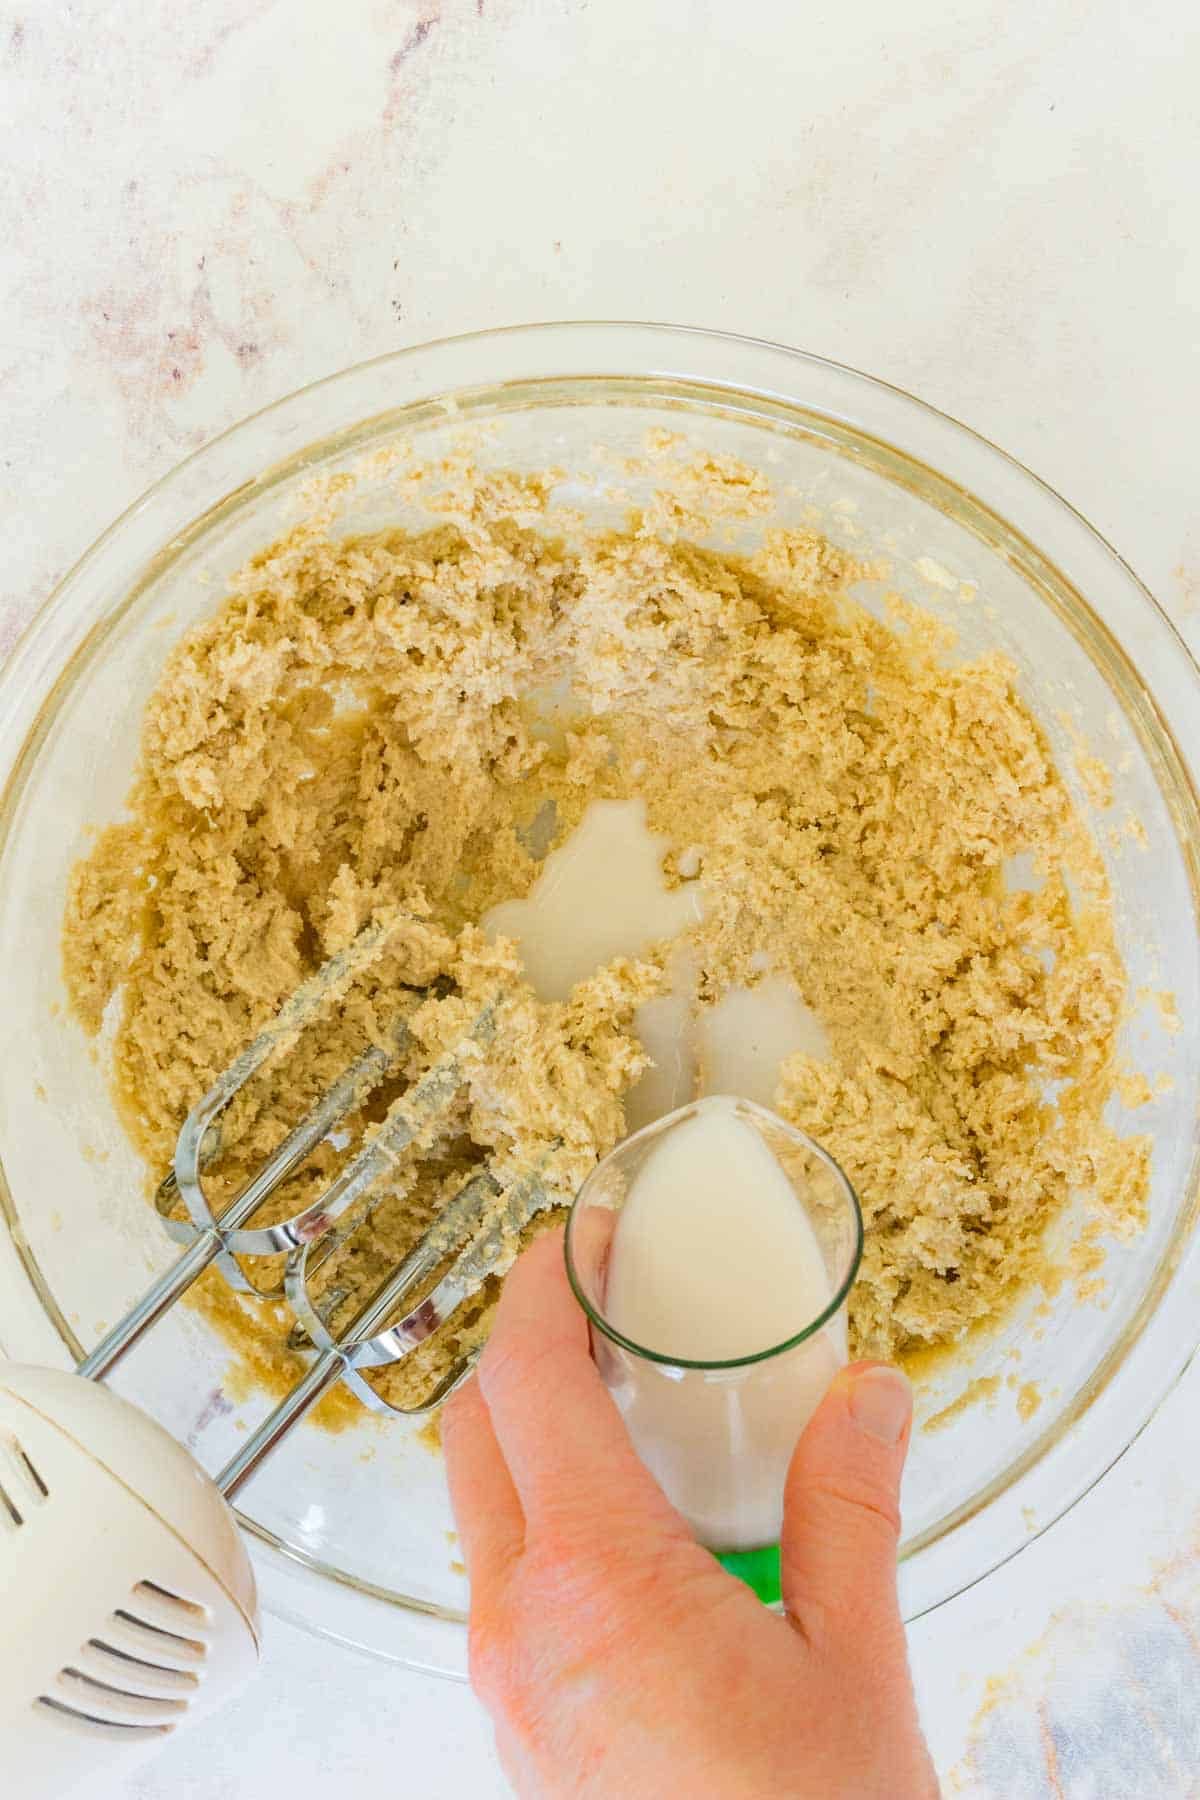 Milk is poured into cookie dough in a mixing bowl, next to a hand mixer.